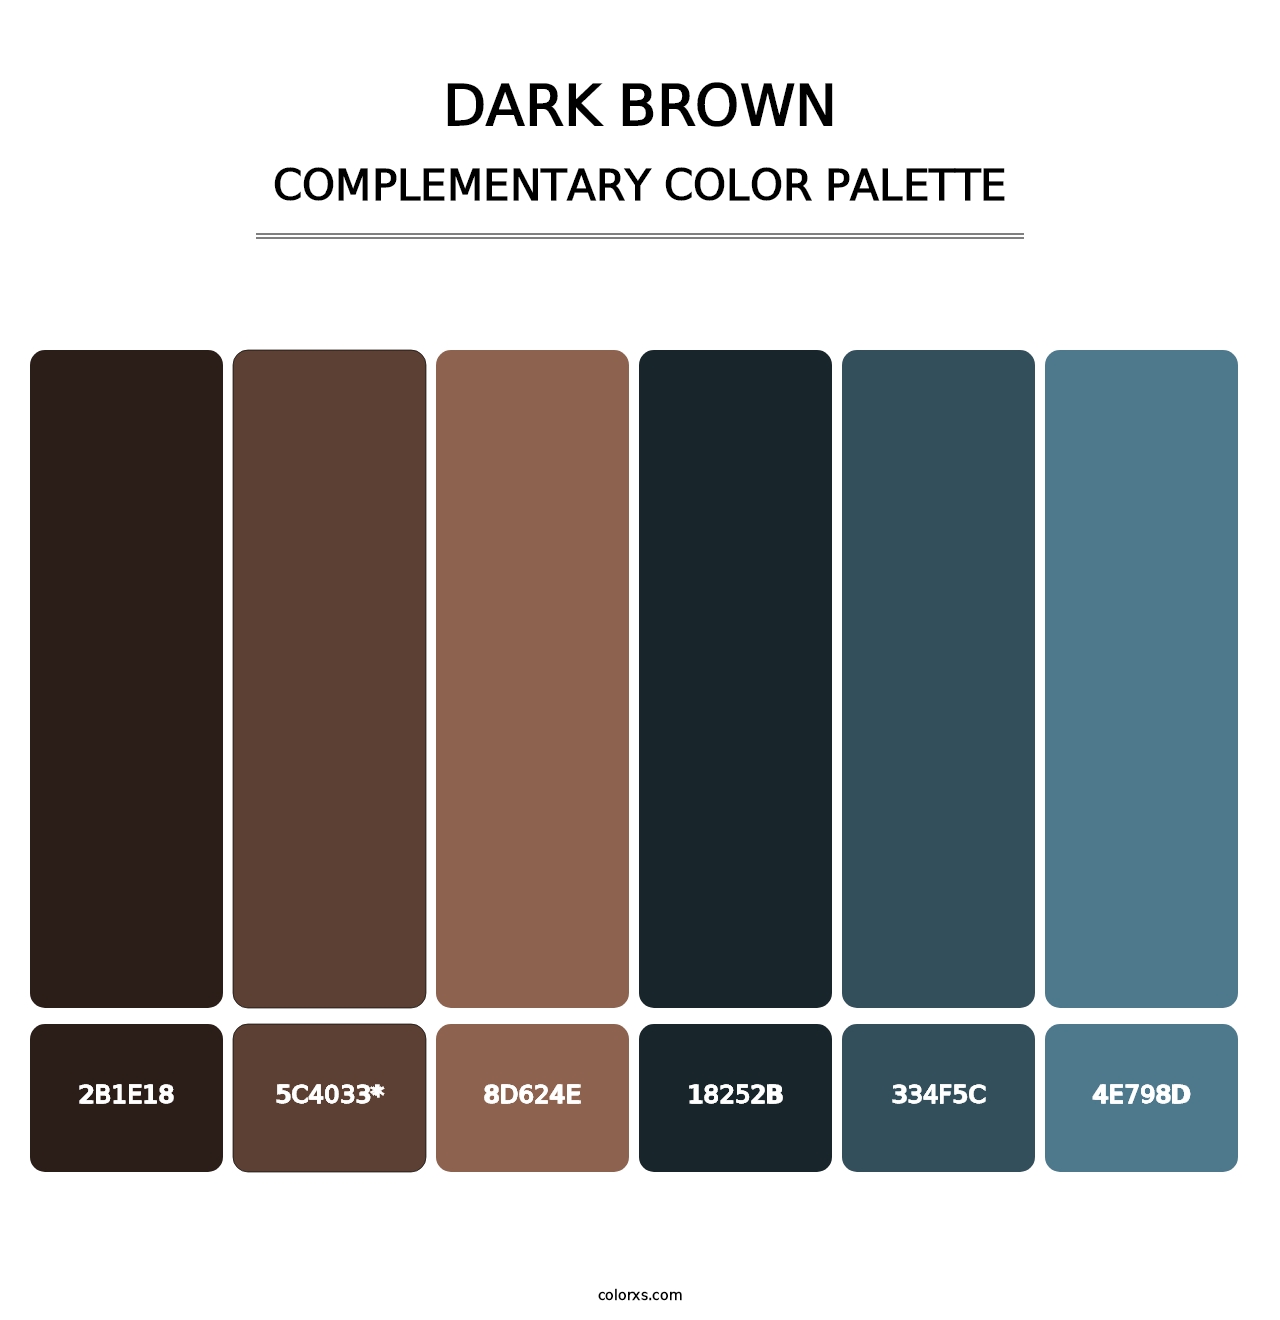 Dark Brown - Complementary Color Palette